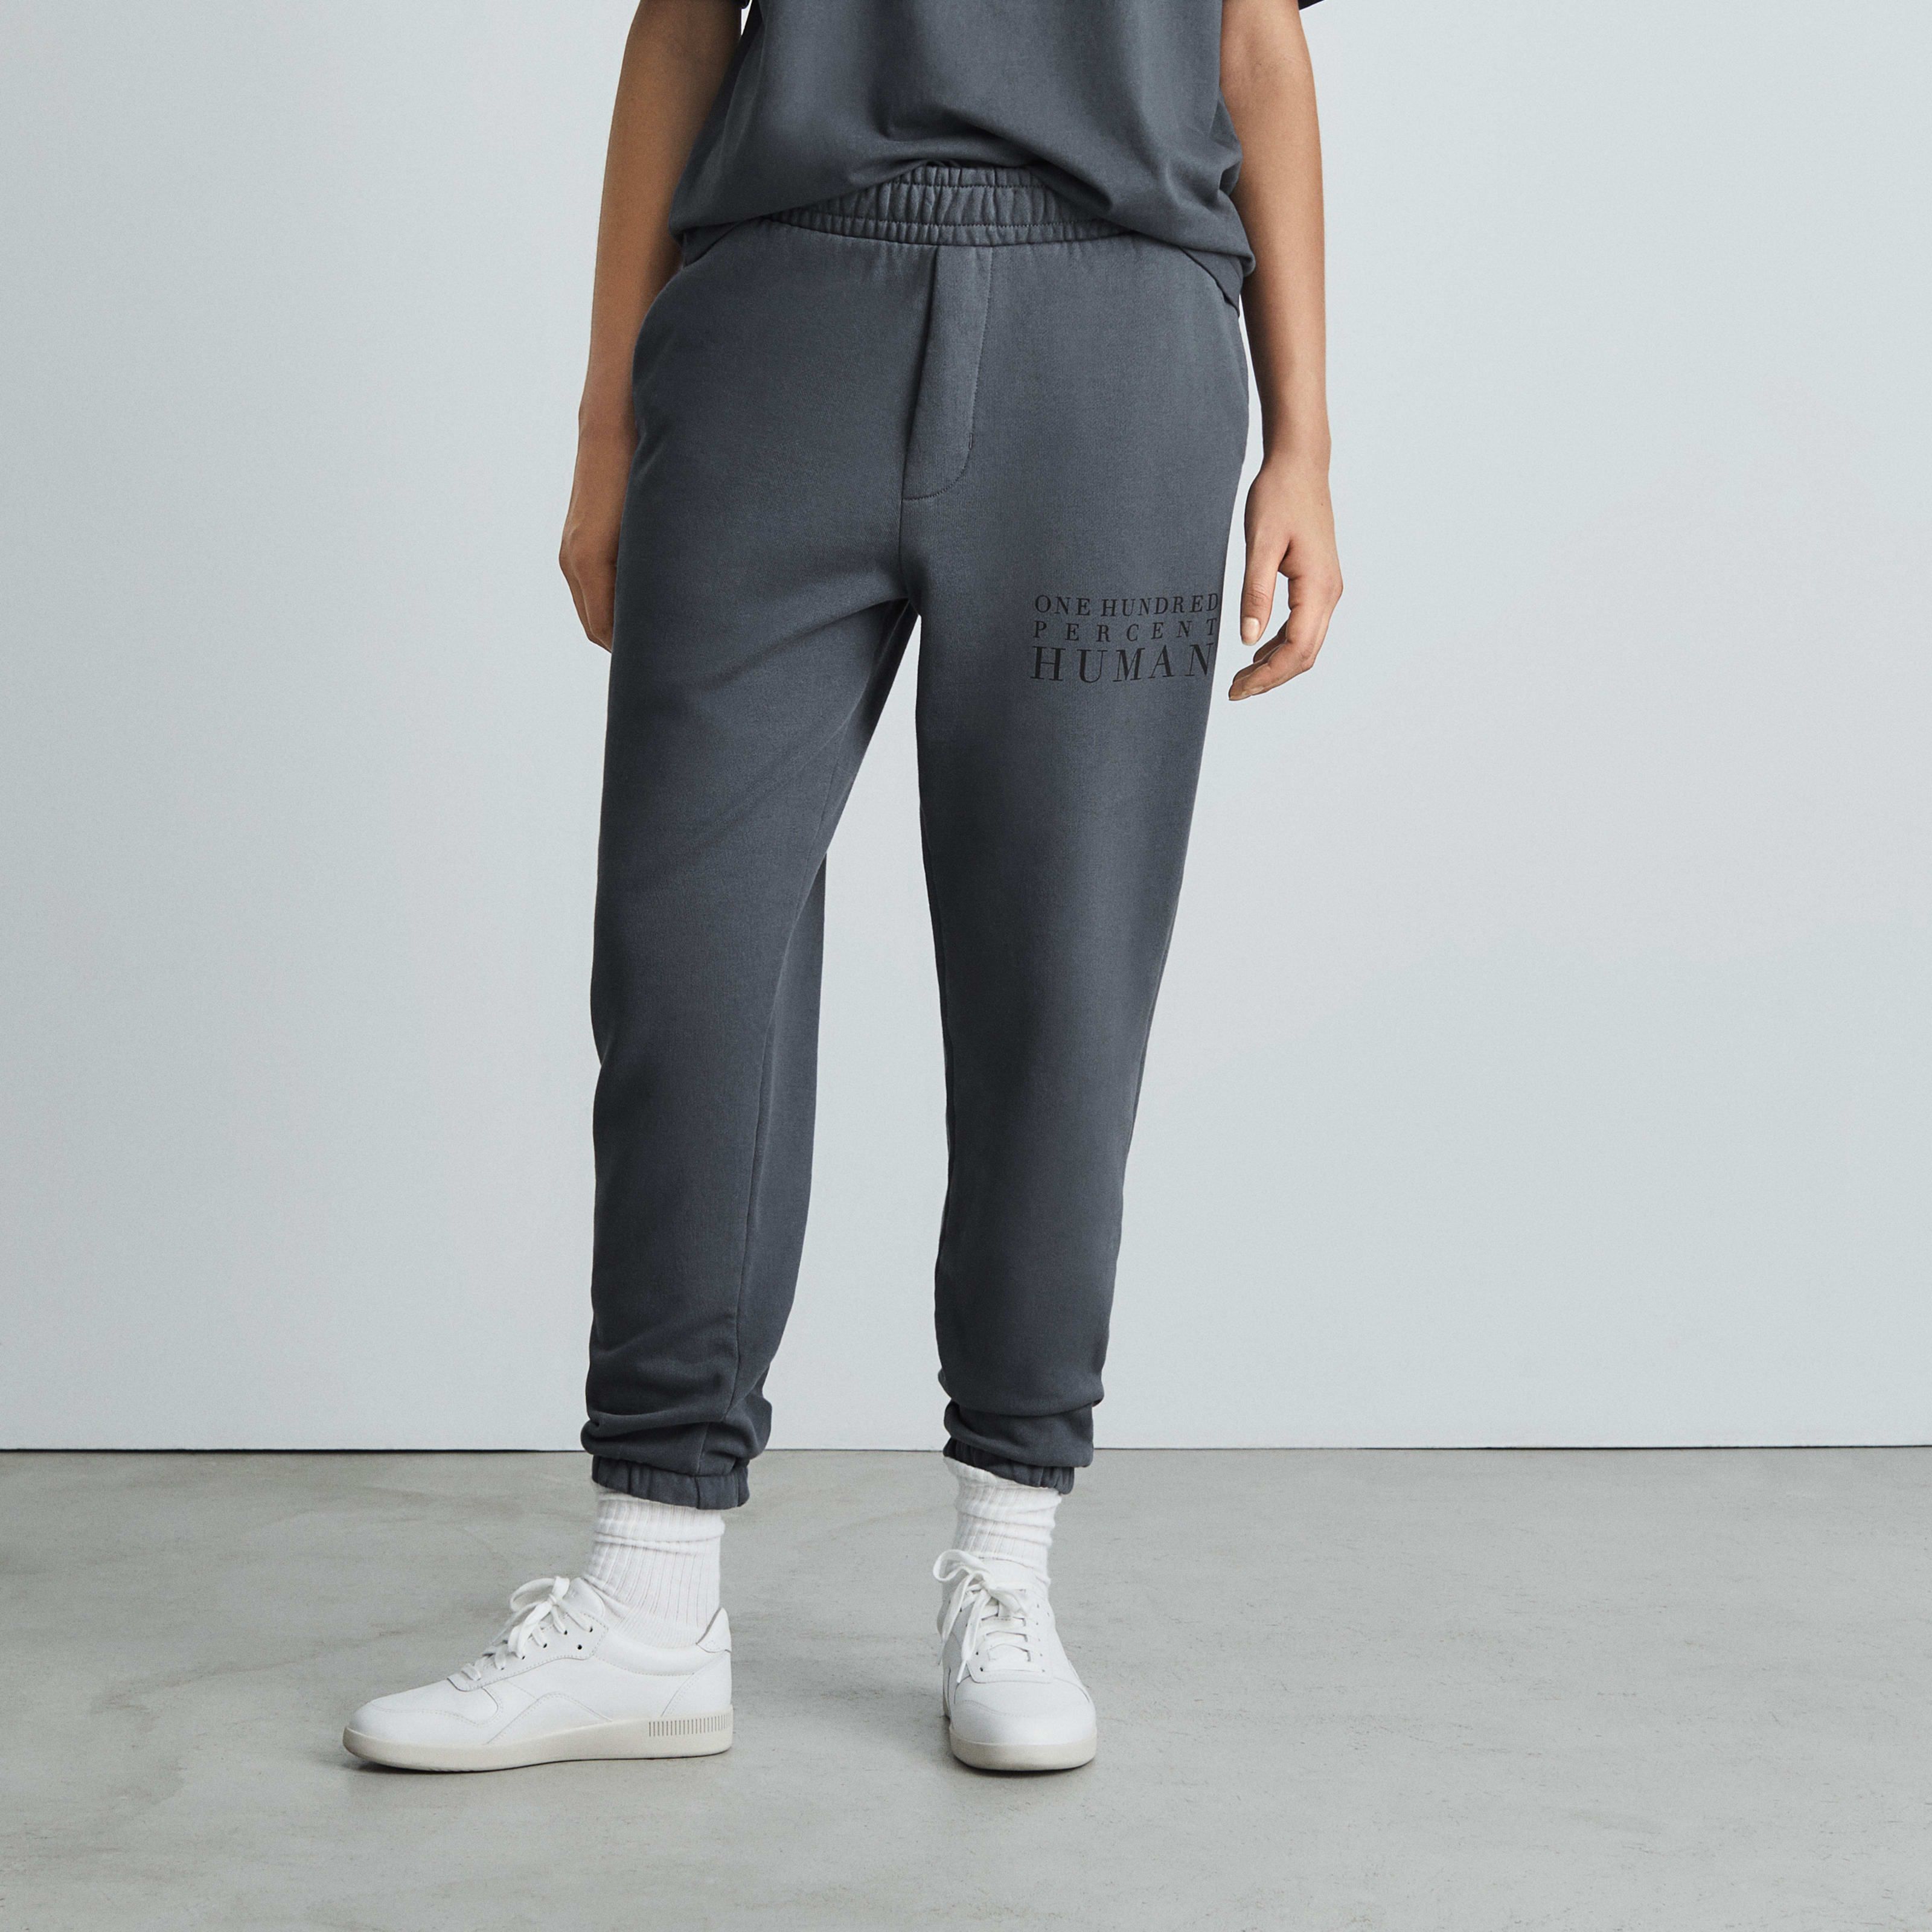 Women's 100% Human Everyone Jogger by Everlane in Slate, Size M | Everlane